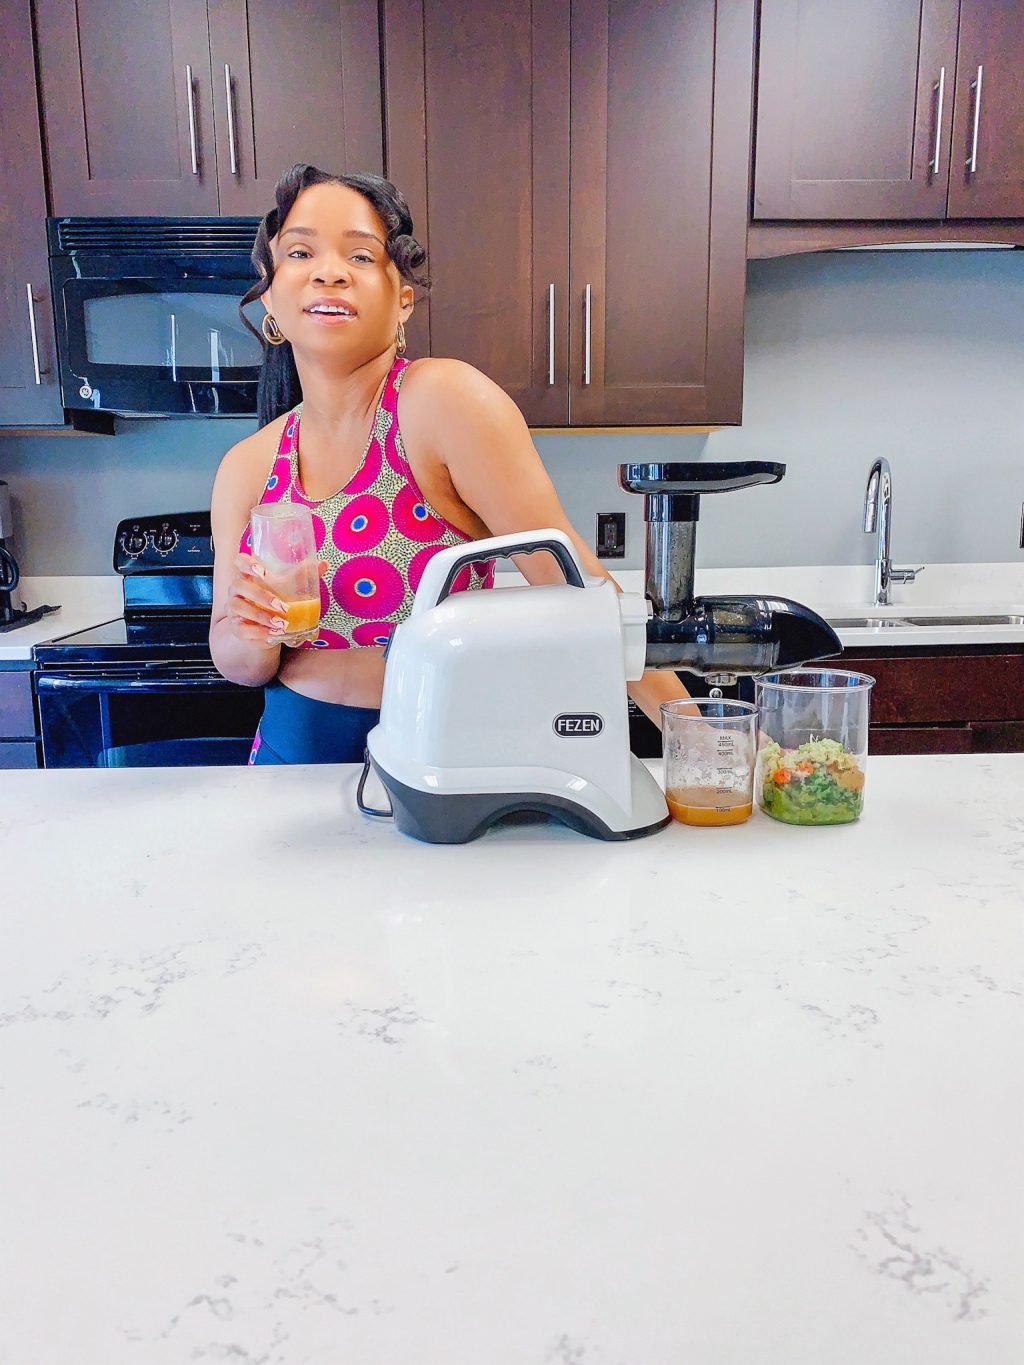 Living A Healthy Lifestyle With Fezen Masticating Juicer